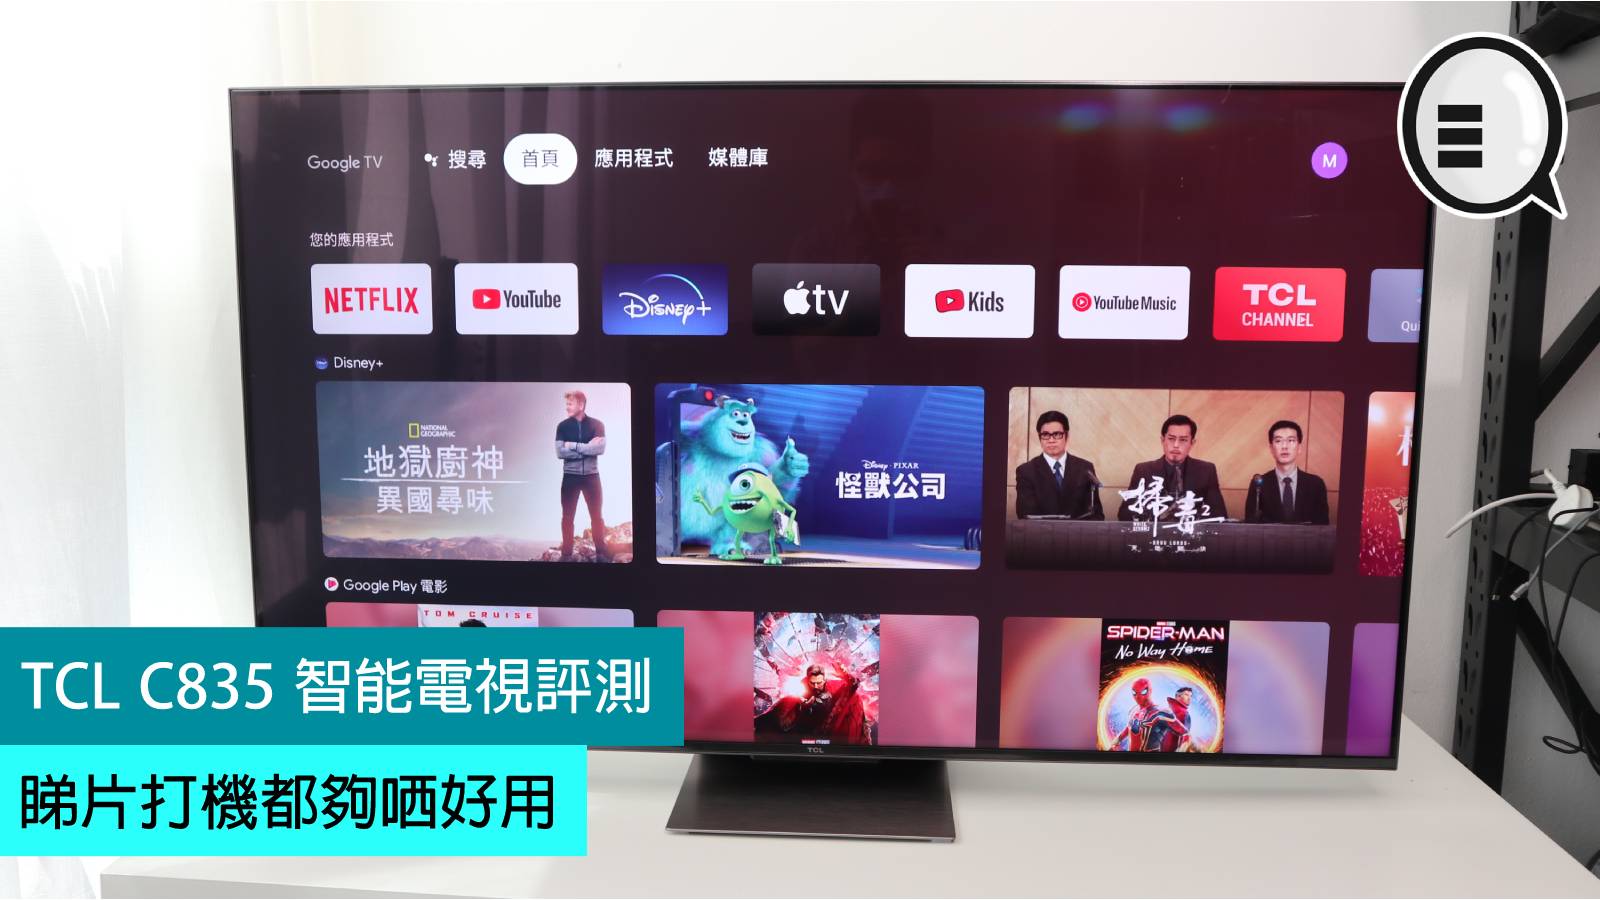 TCL C835 smart TV review: It’s easy to use when watching movies and playing games – Qooah